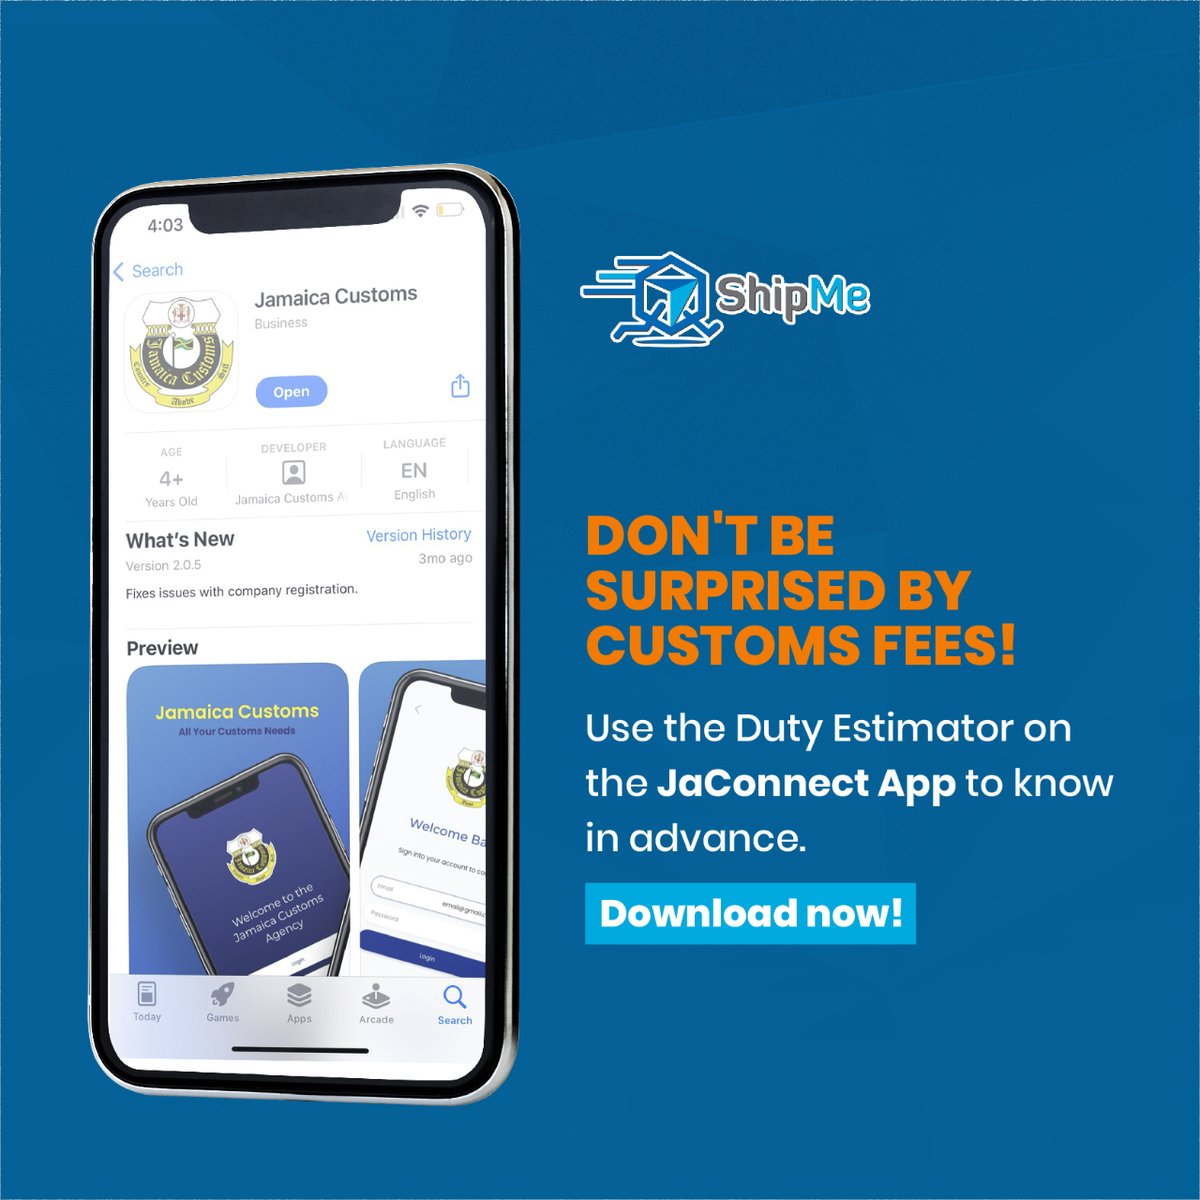 Don't get caught off guard by customs fees!🤯

Use the Duty Estimator on the JaConnect App to know in advance and plan accordingly. 📱💸

Download now and stay ahead of the game! 

#CustomsSimplified #BudgetFriendlyImports #ShopWithConfidence #ValueForMoney